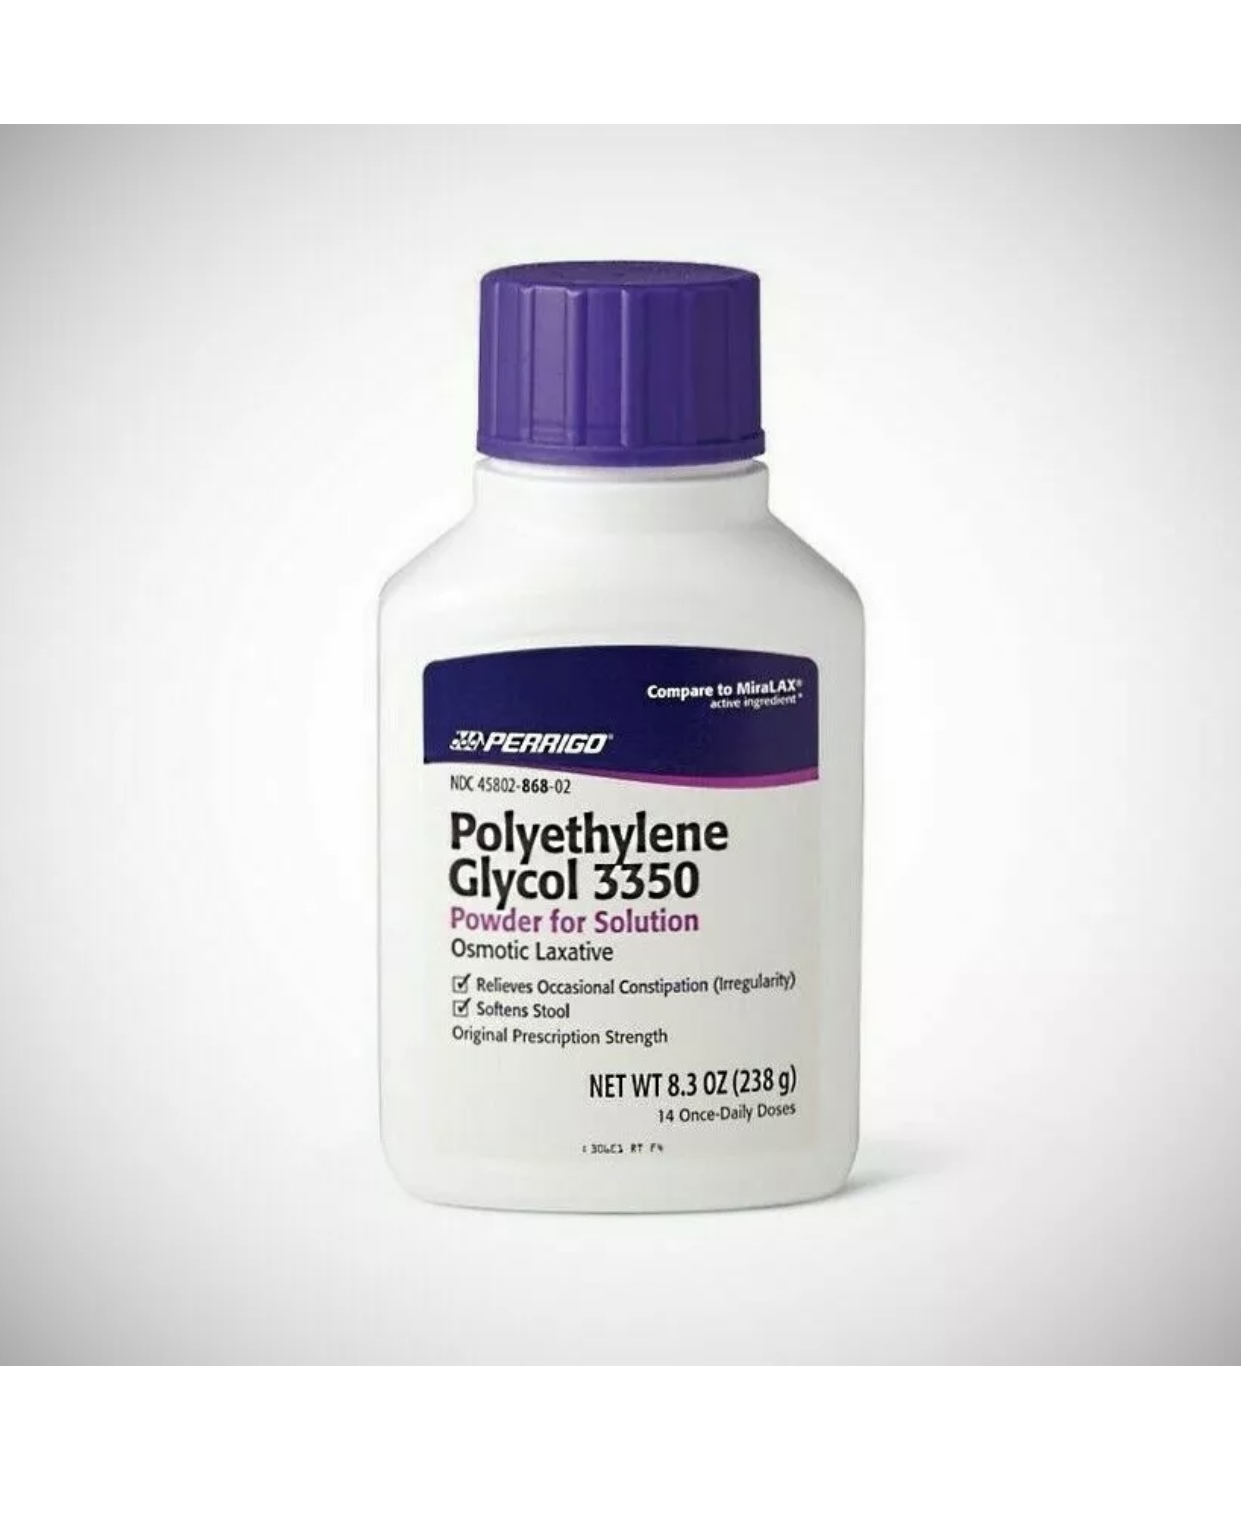 Primary image for Polyethylene Glycol 3350 - 8.3oz for treatment of occasional constipation